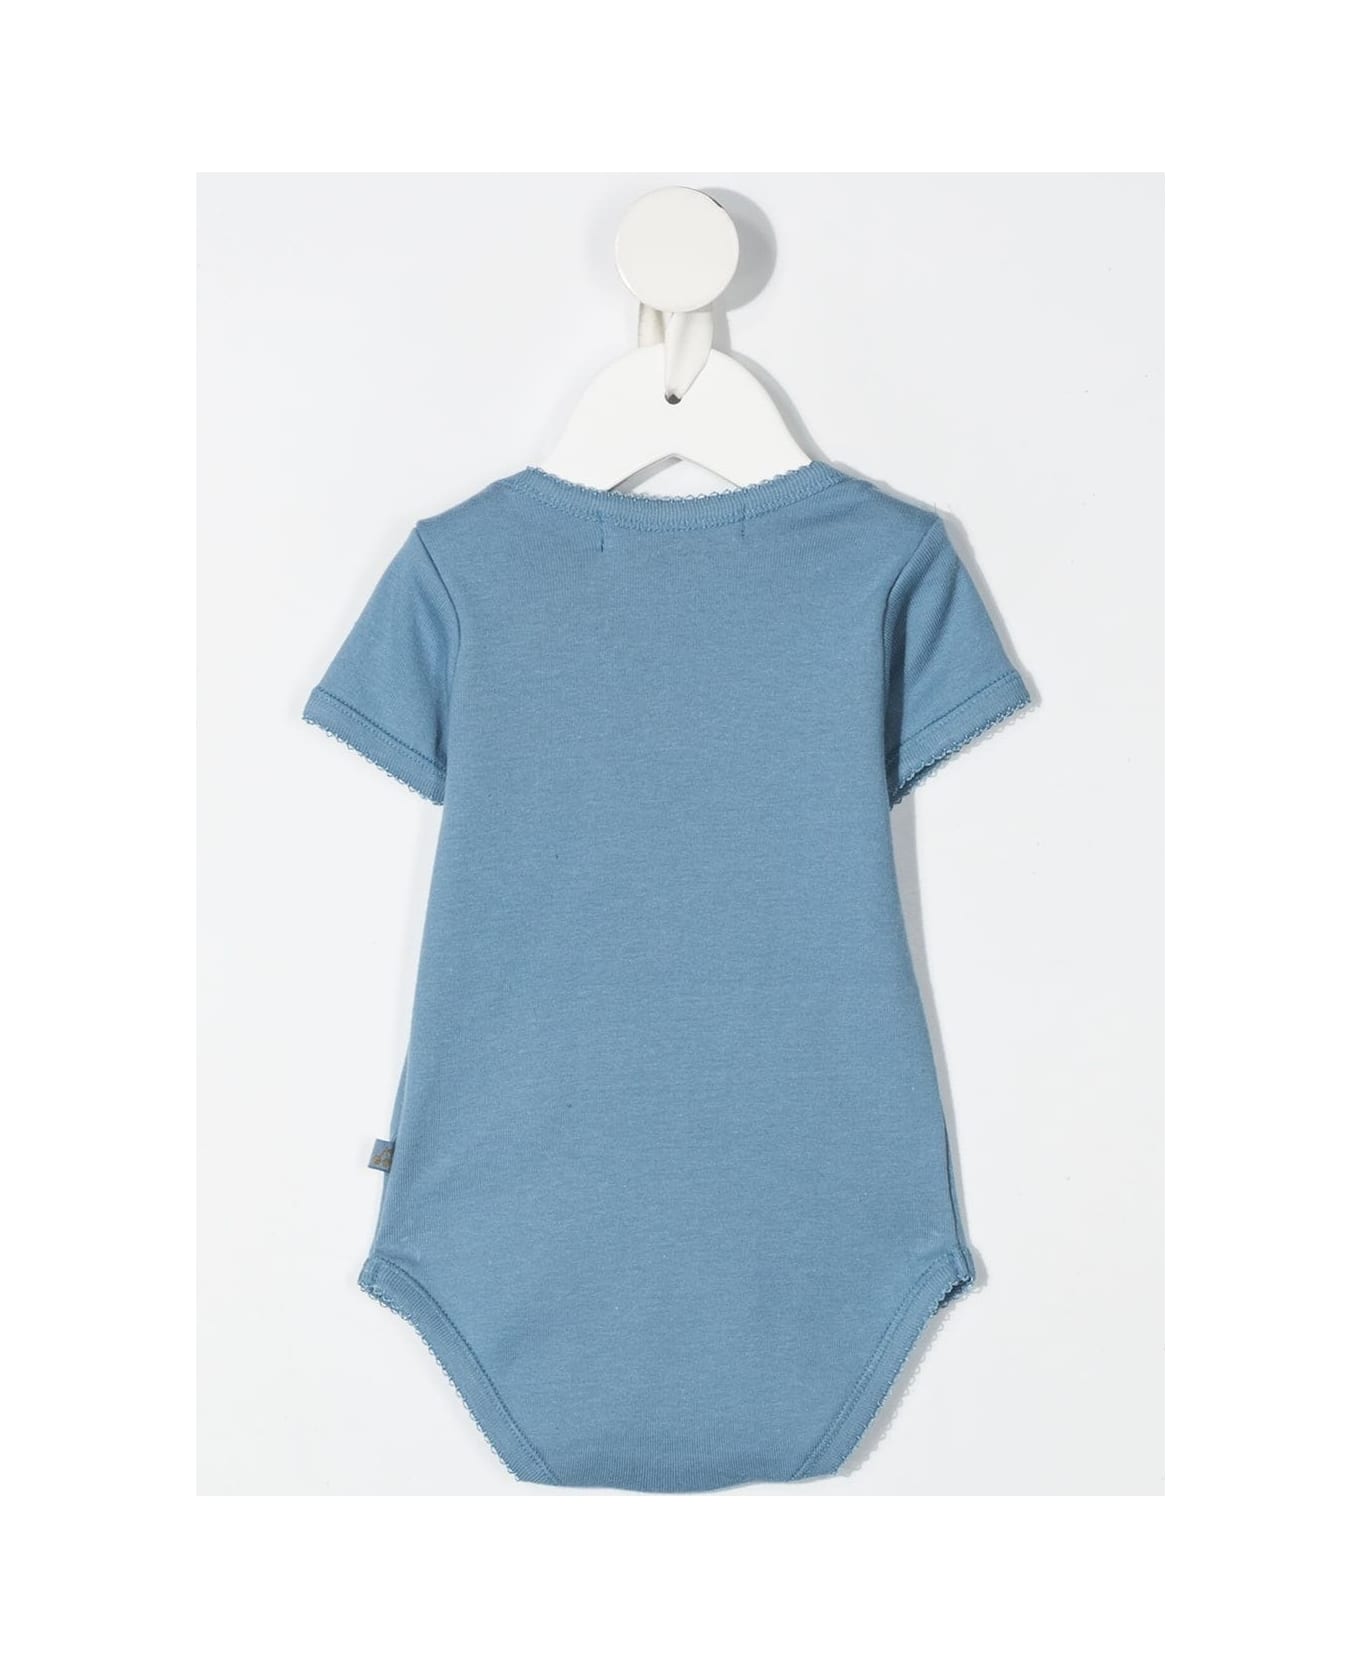 Bonpoint 3 Body Pack In Light Blue And White Cotton - Blue